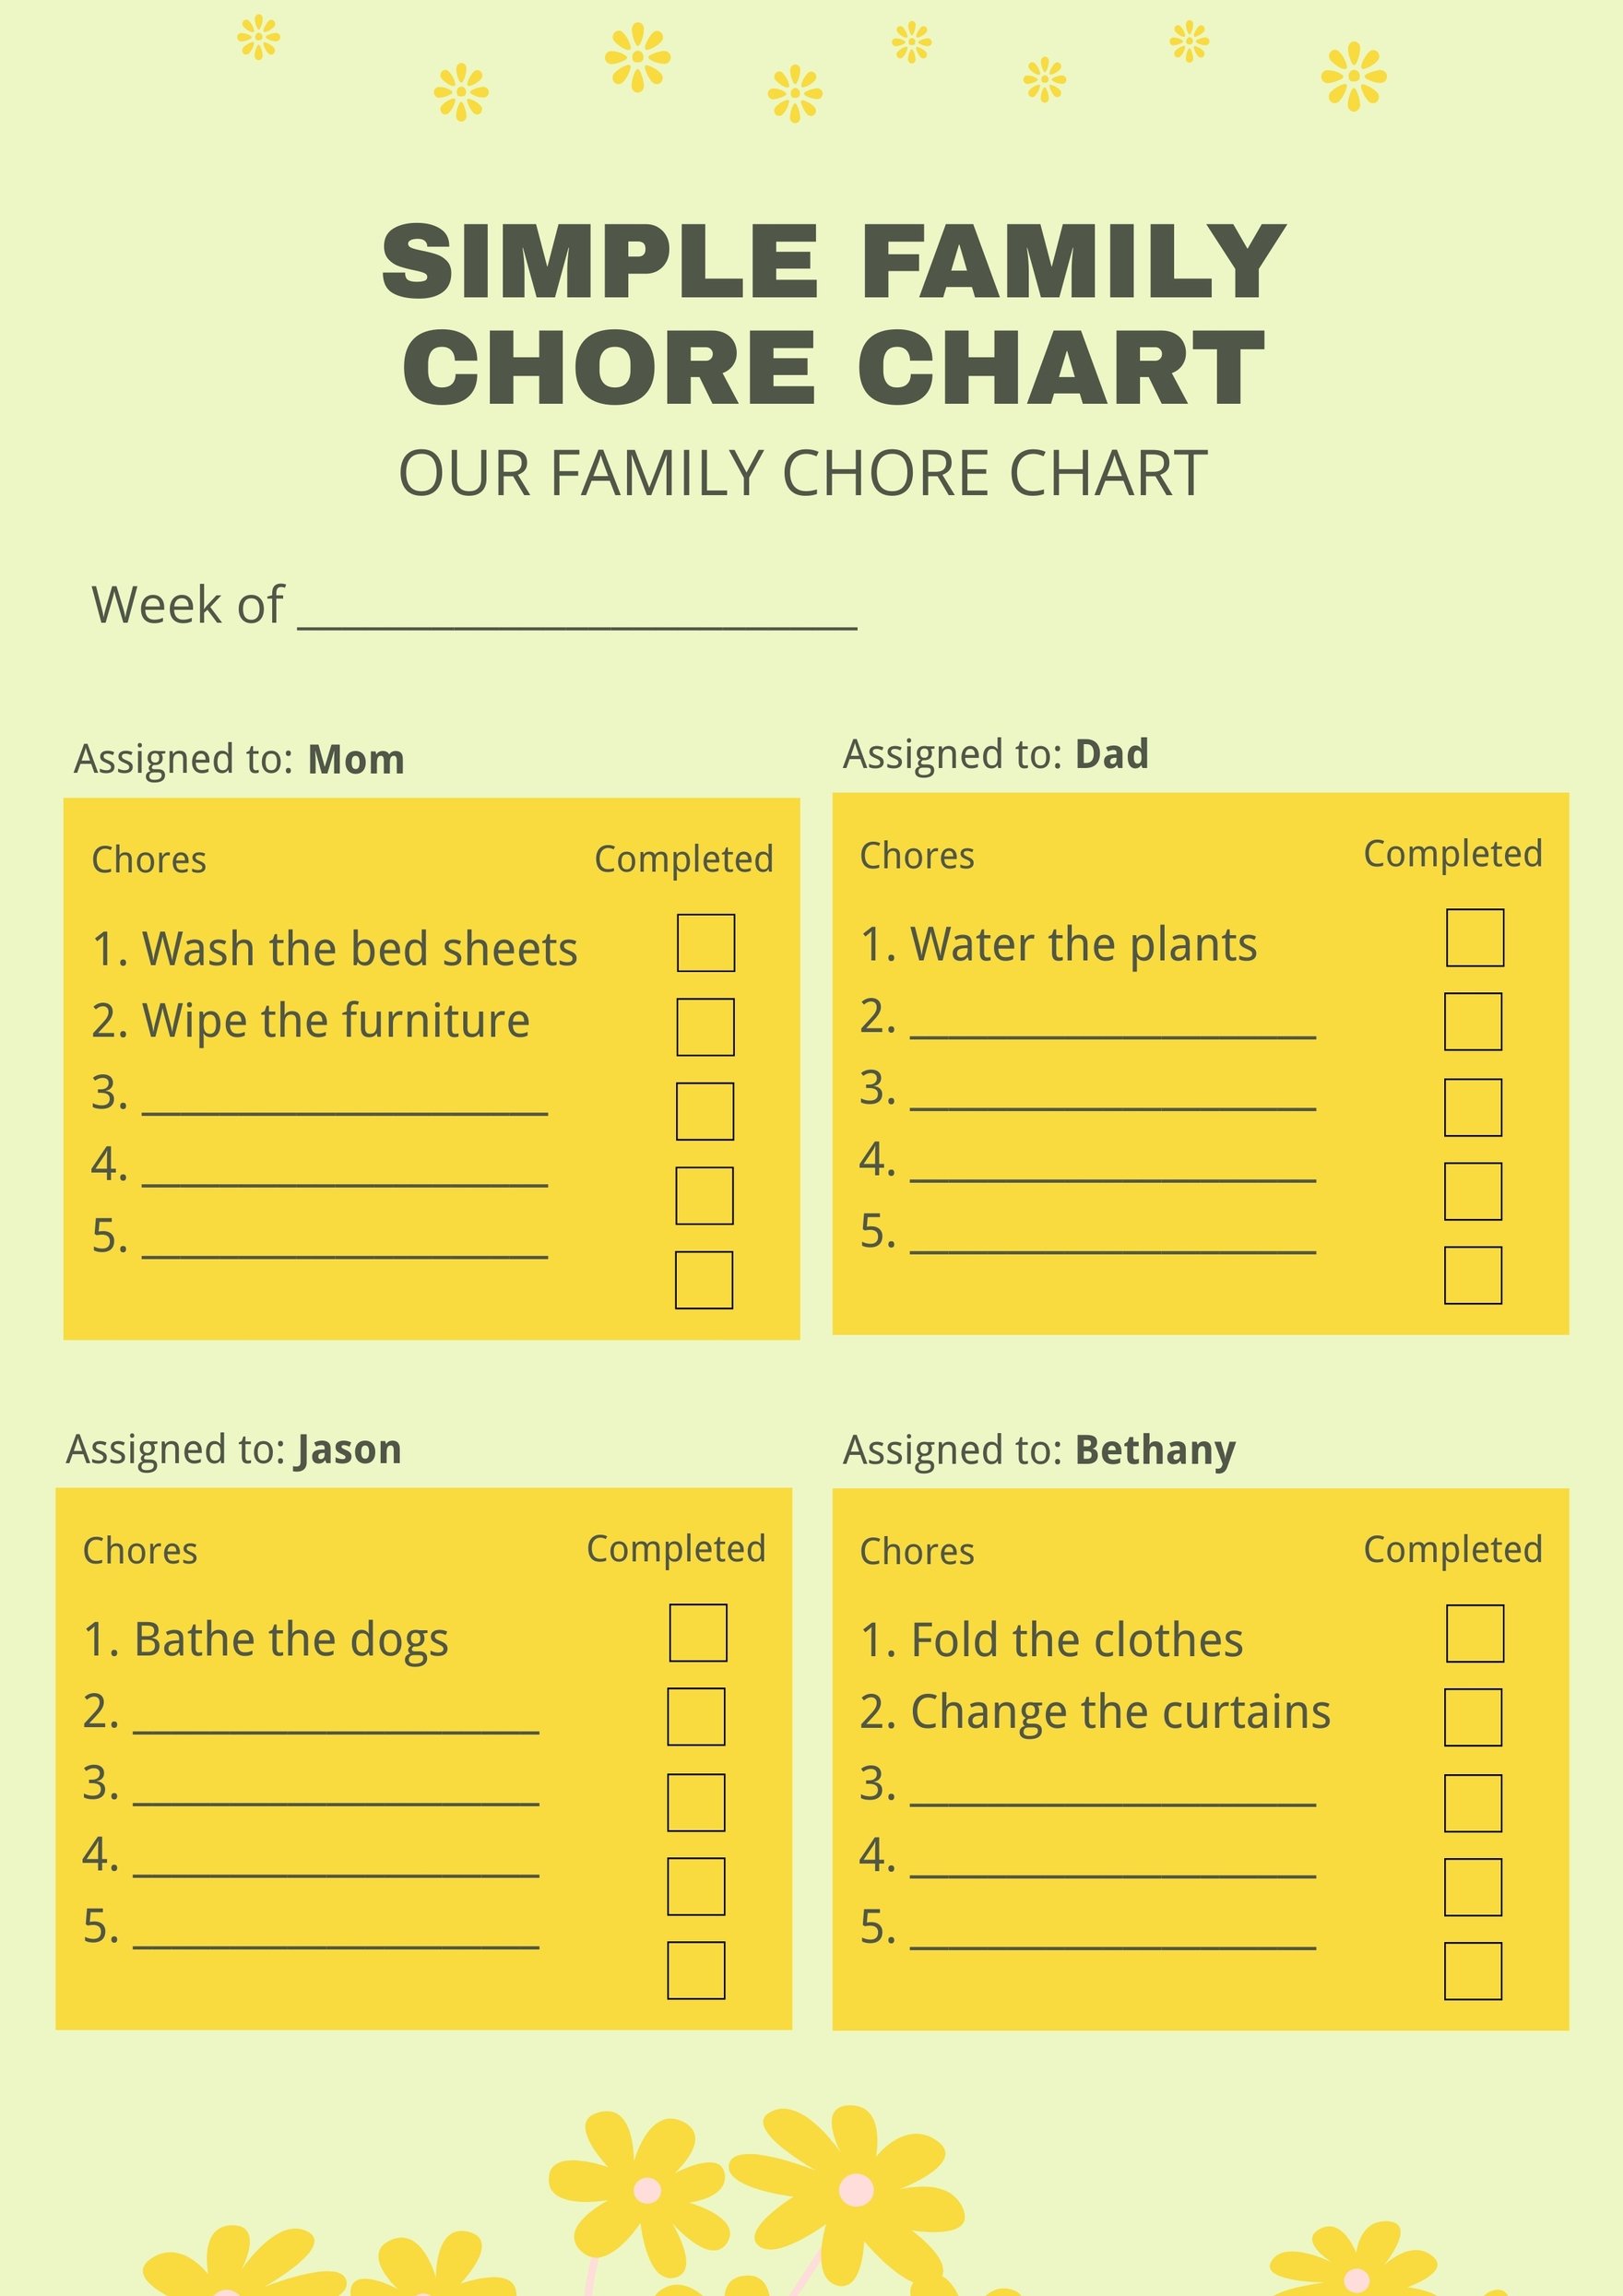 simple-family-chore-chart